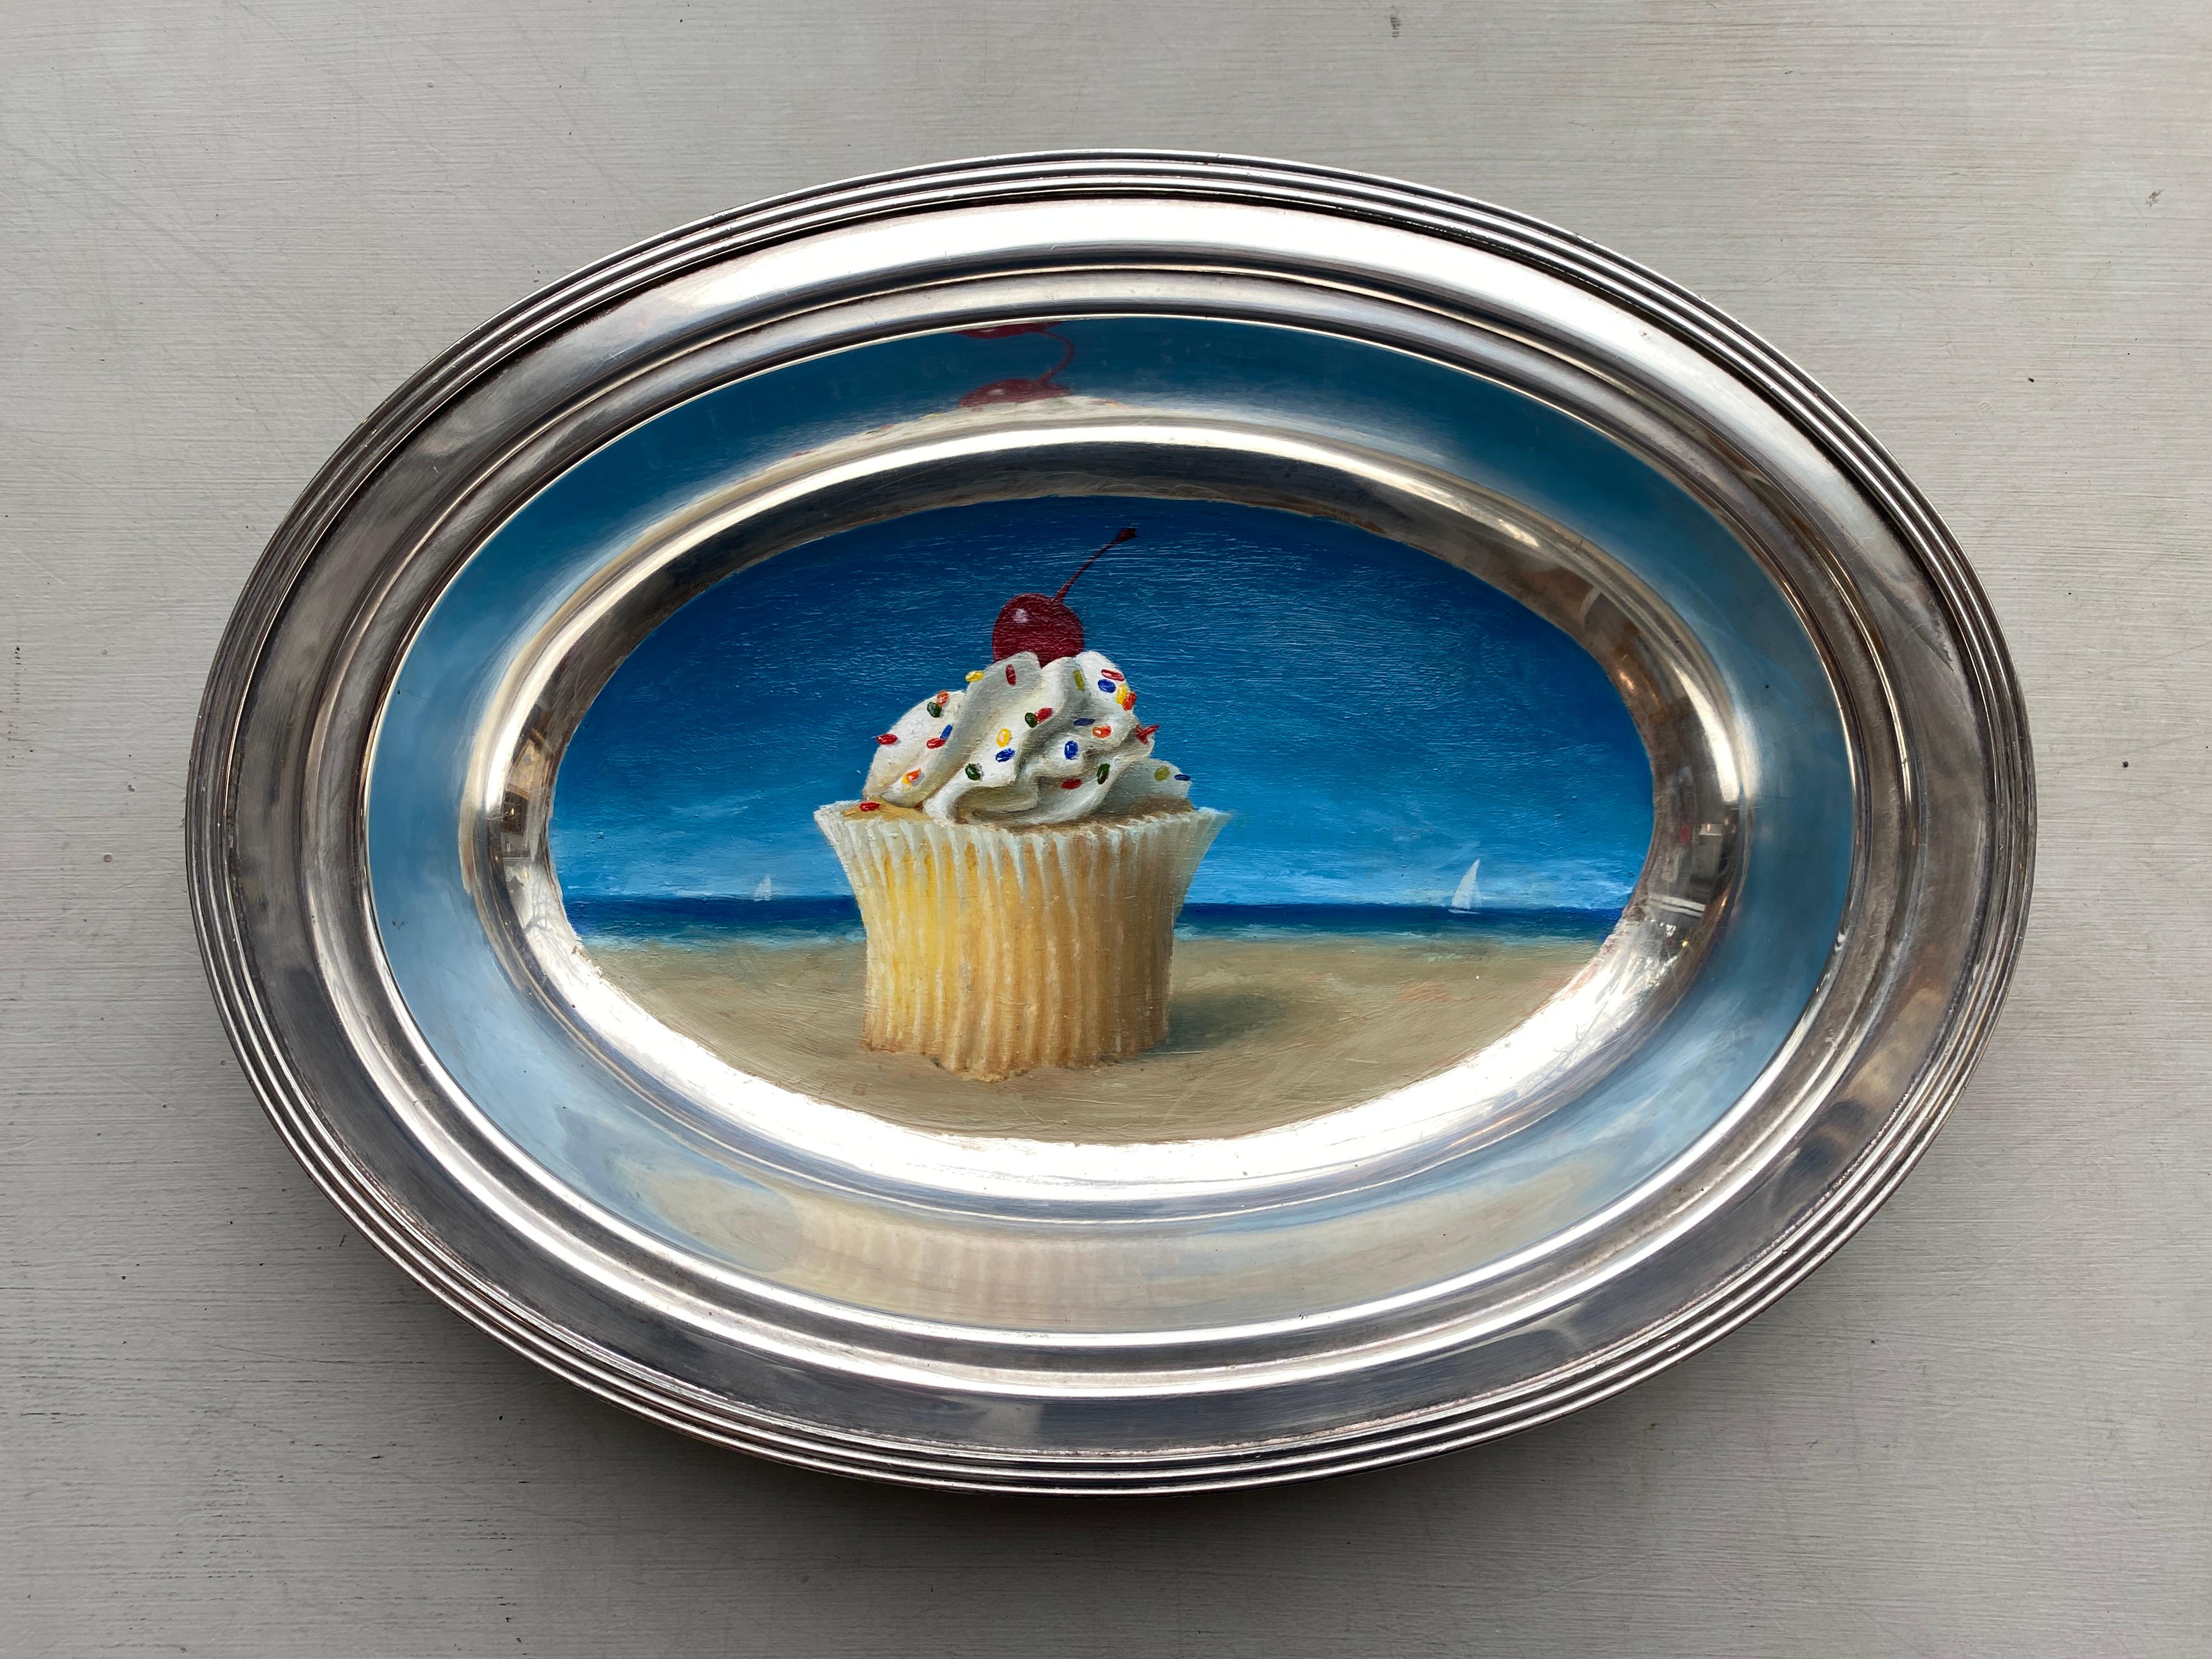 Cupcake By the Sea - unique oil painting on silver tray For Sale 3